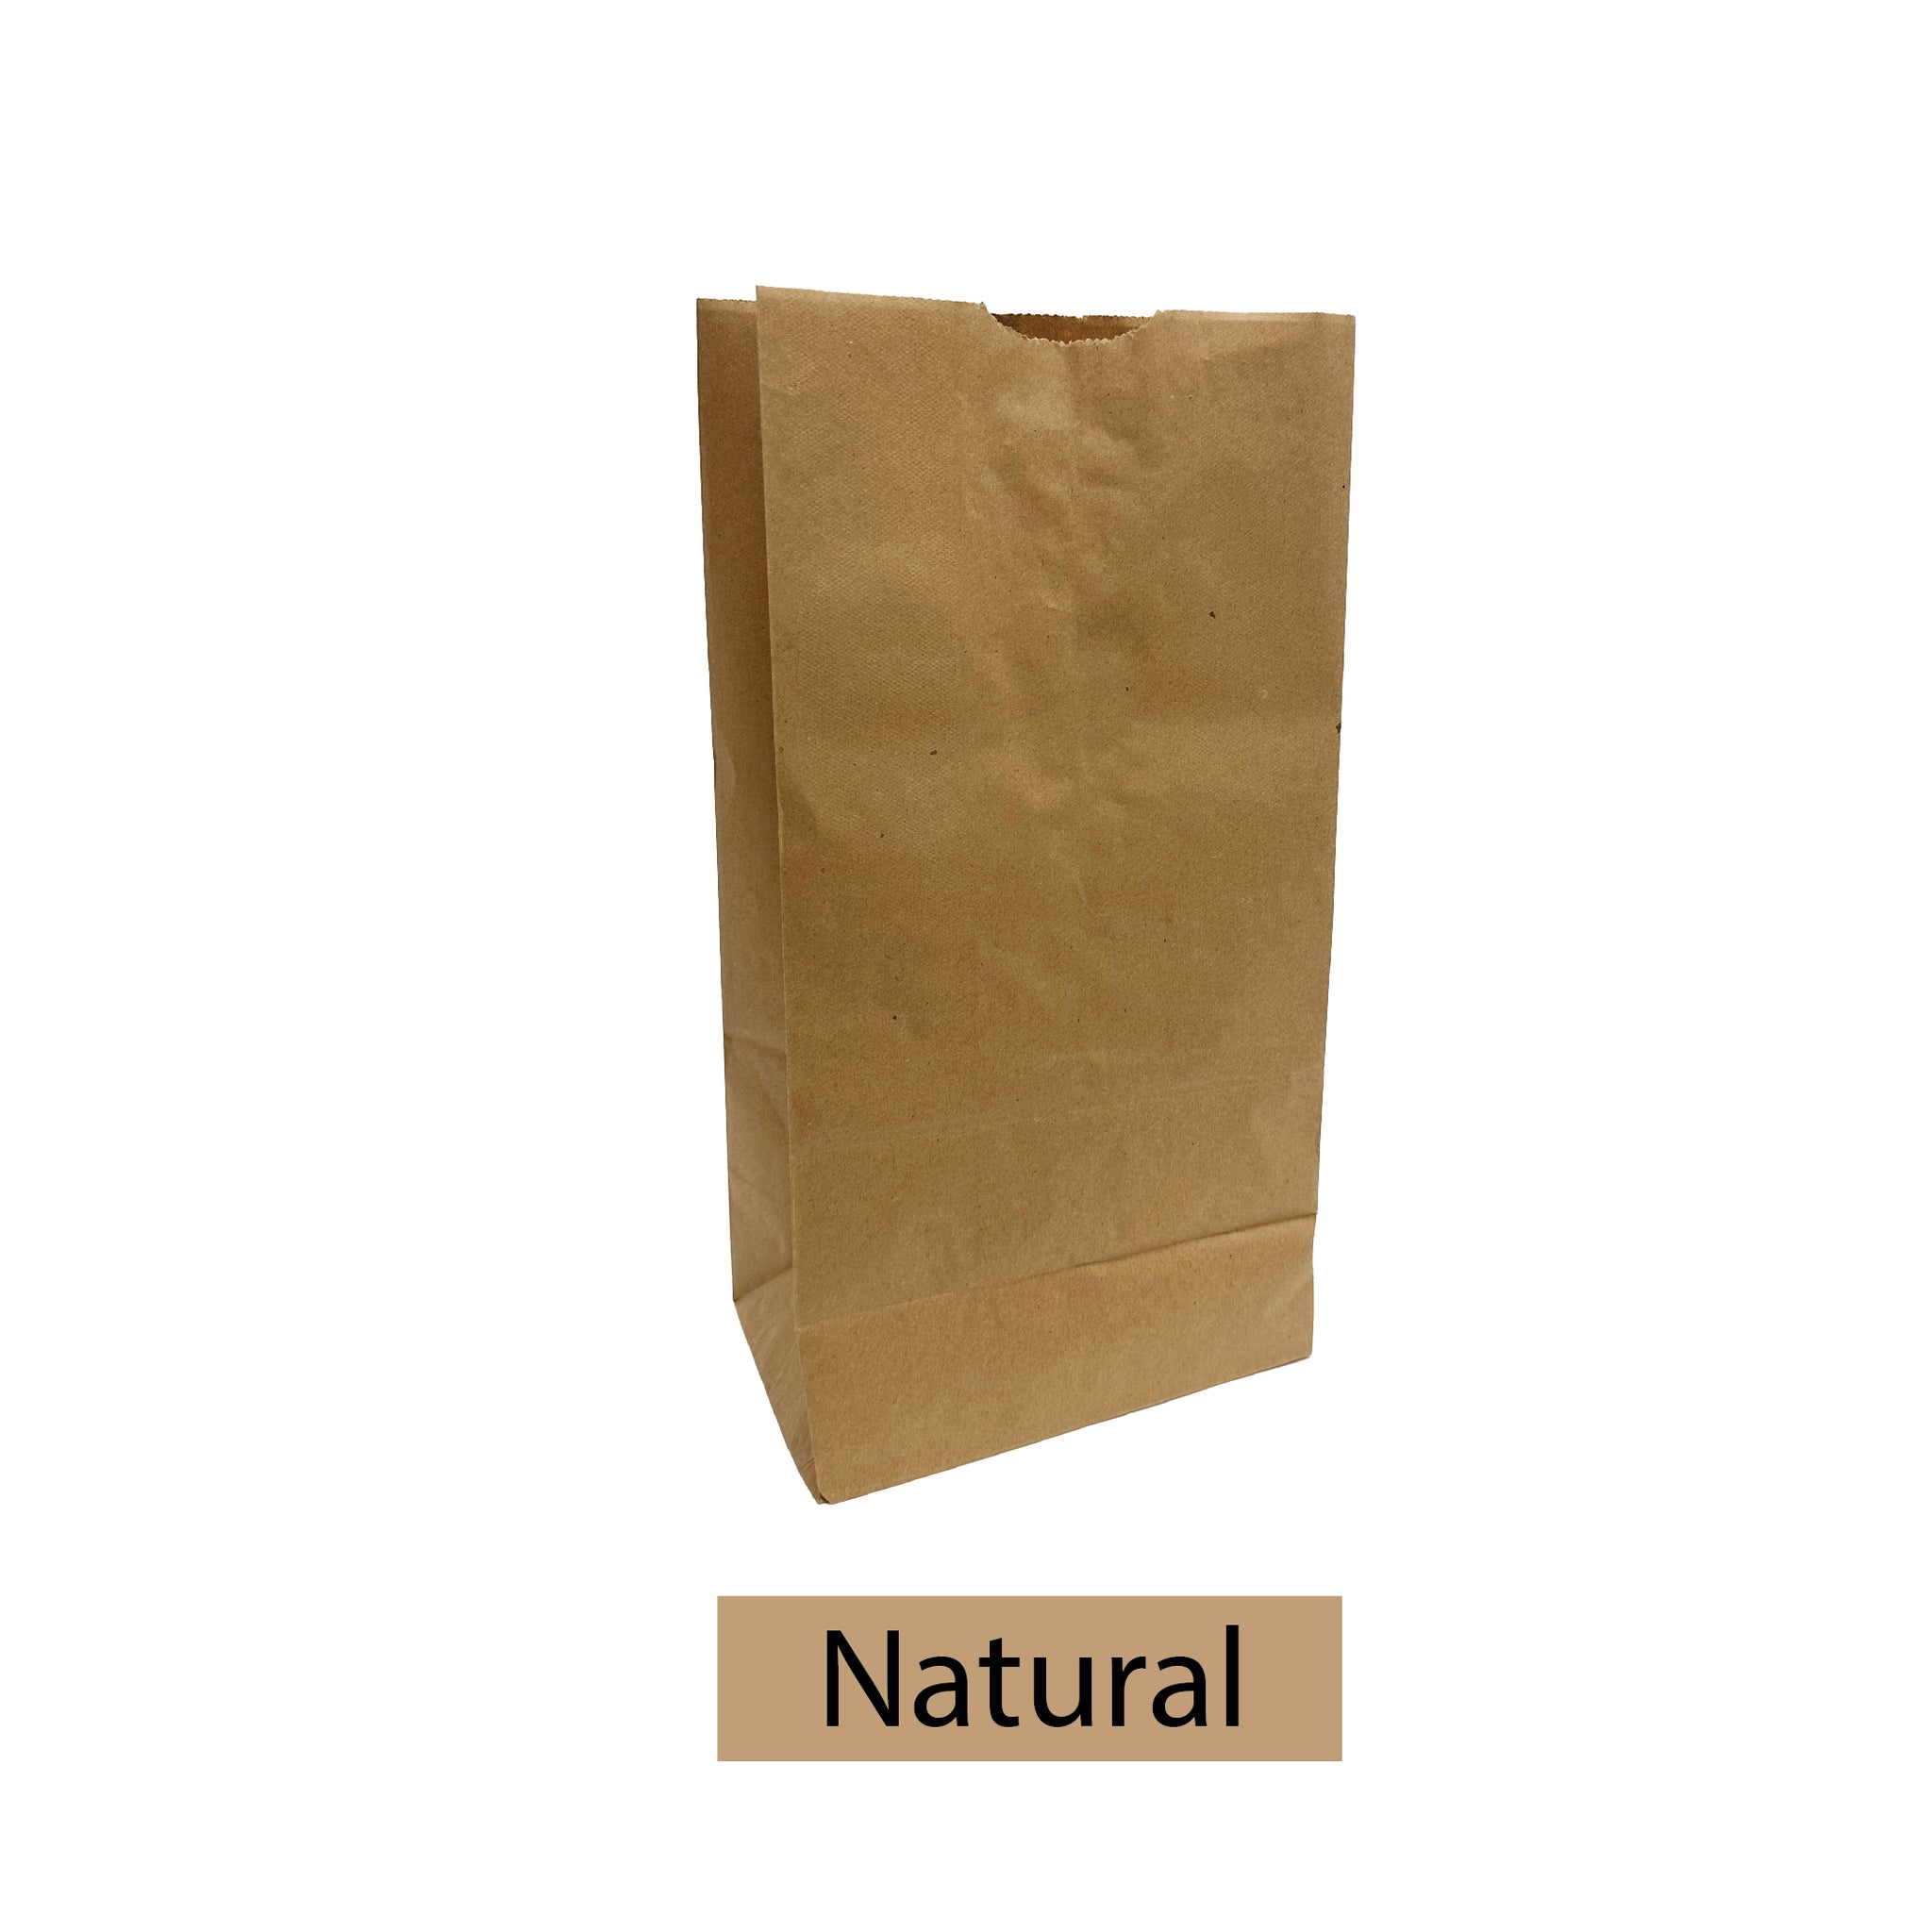 A natural kraft paper bag with the word "natural" on it